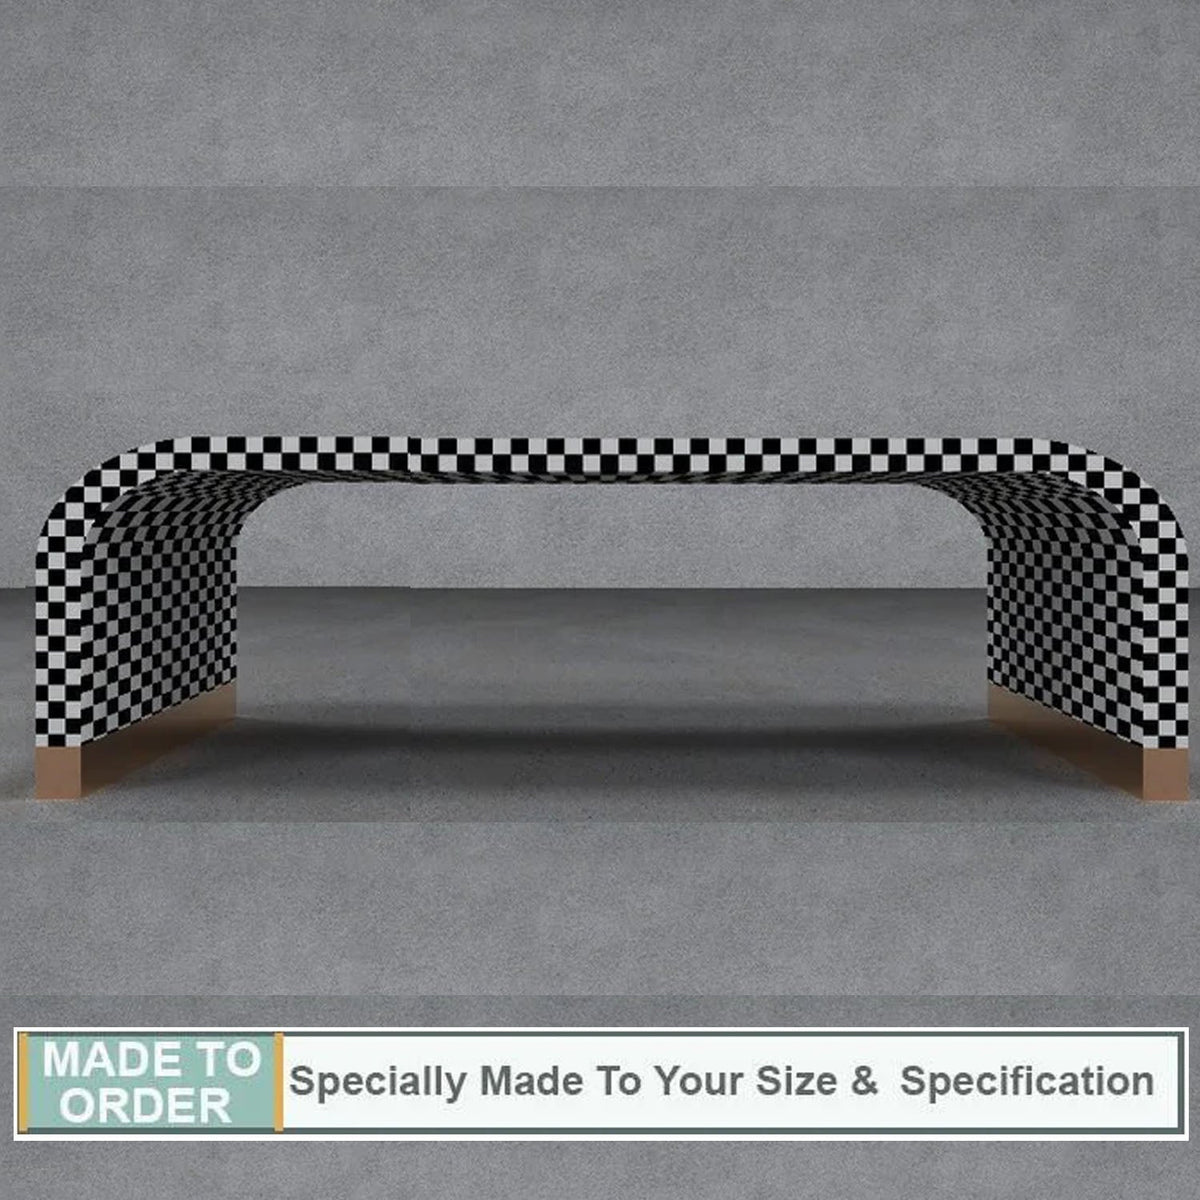 Jimmy Wood and Bone Inlay Checkerboard Coffee Table - Black & White - Notbrand